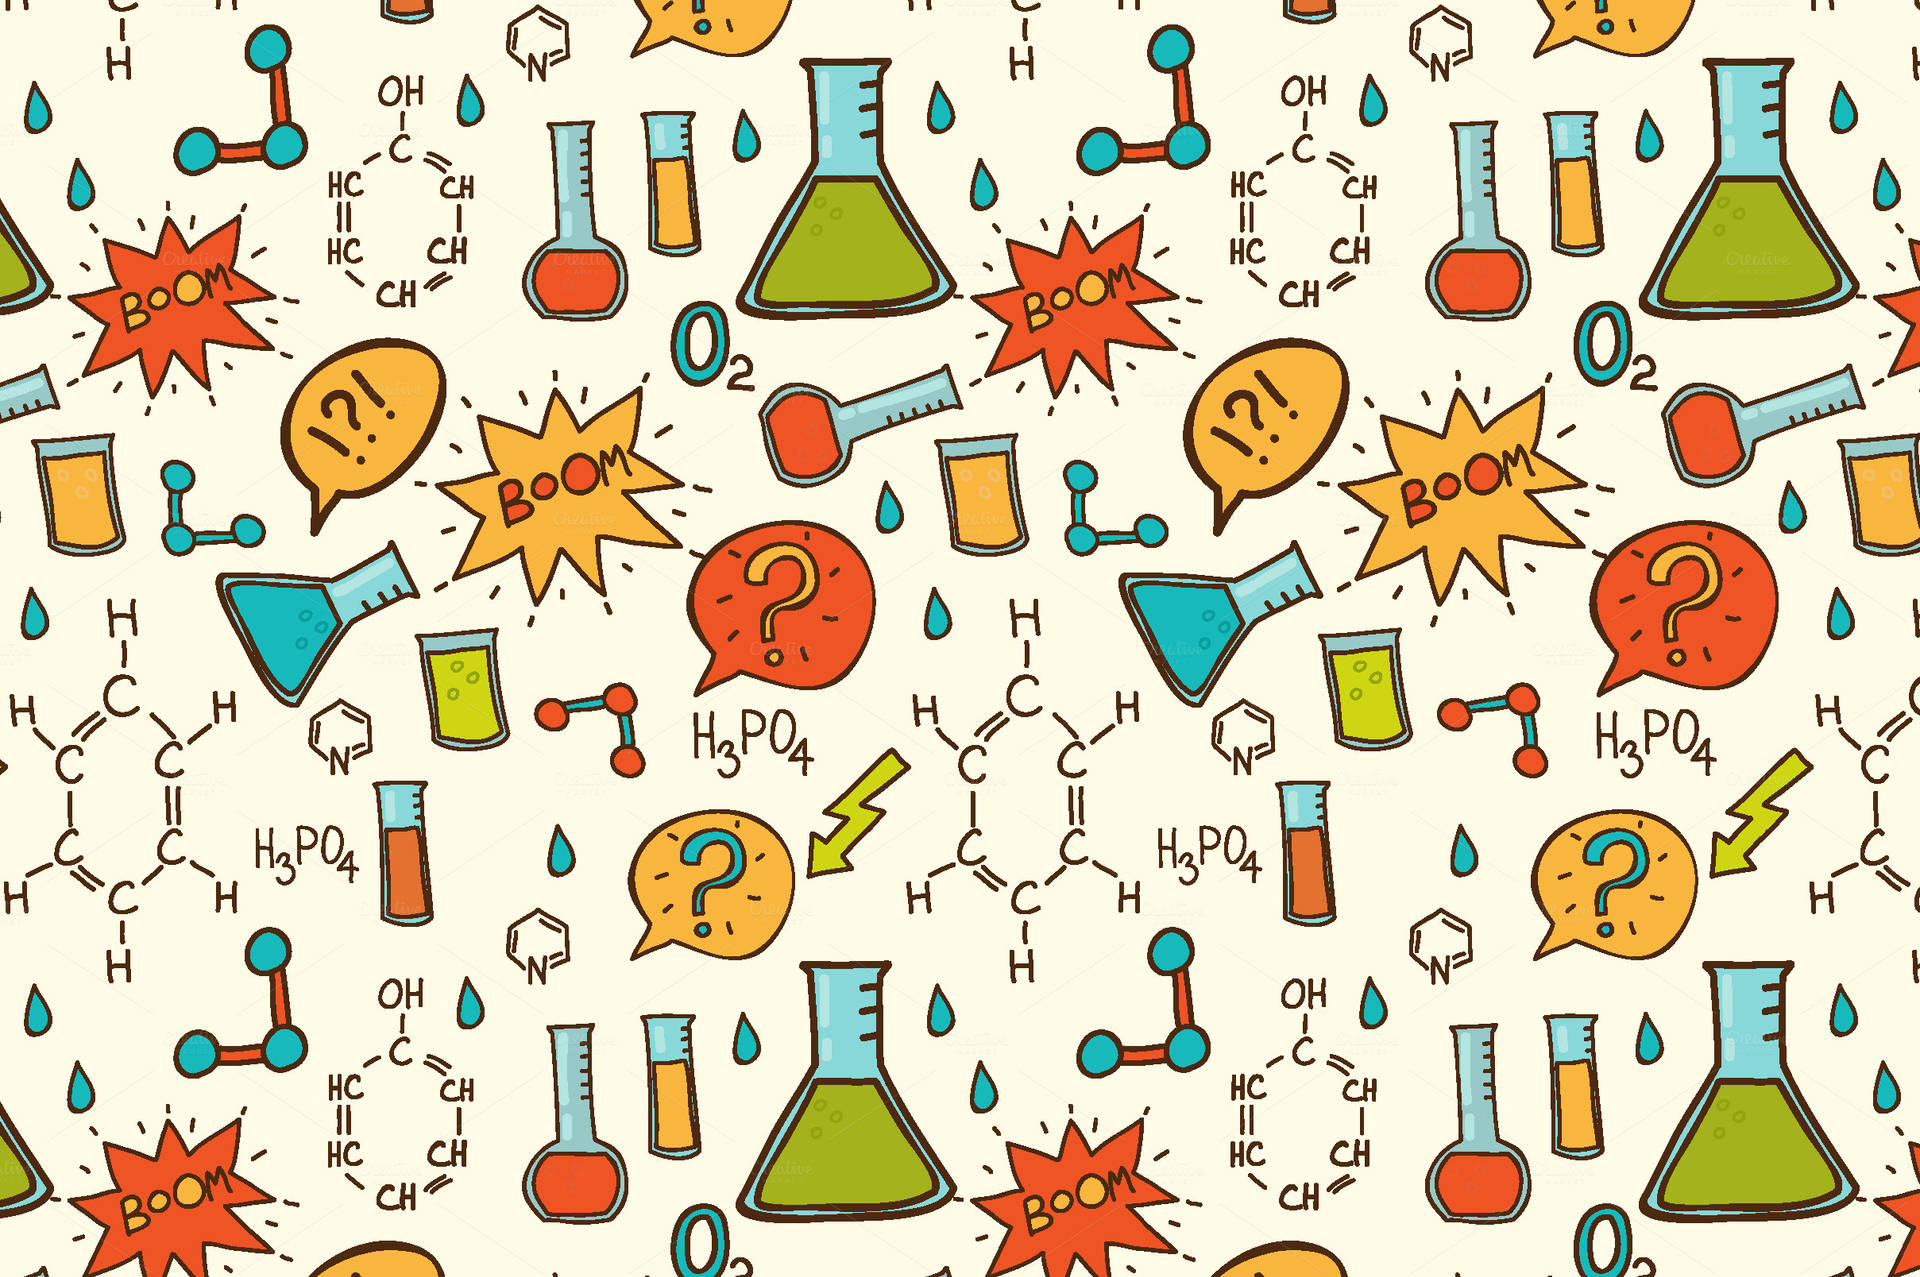 Free Chemistry Wallpaper Downloads, [100+] Chemistry Wallpapers for FREE |  